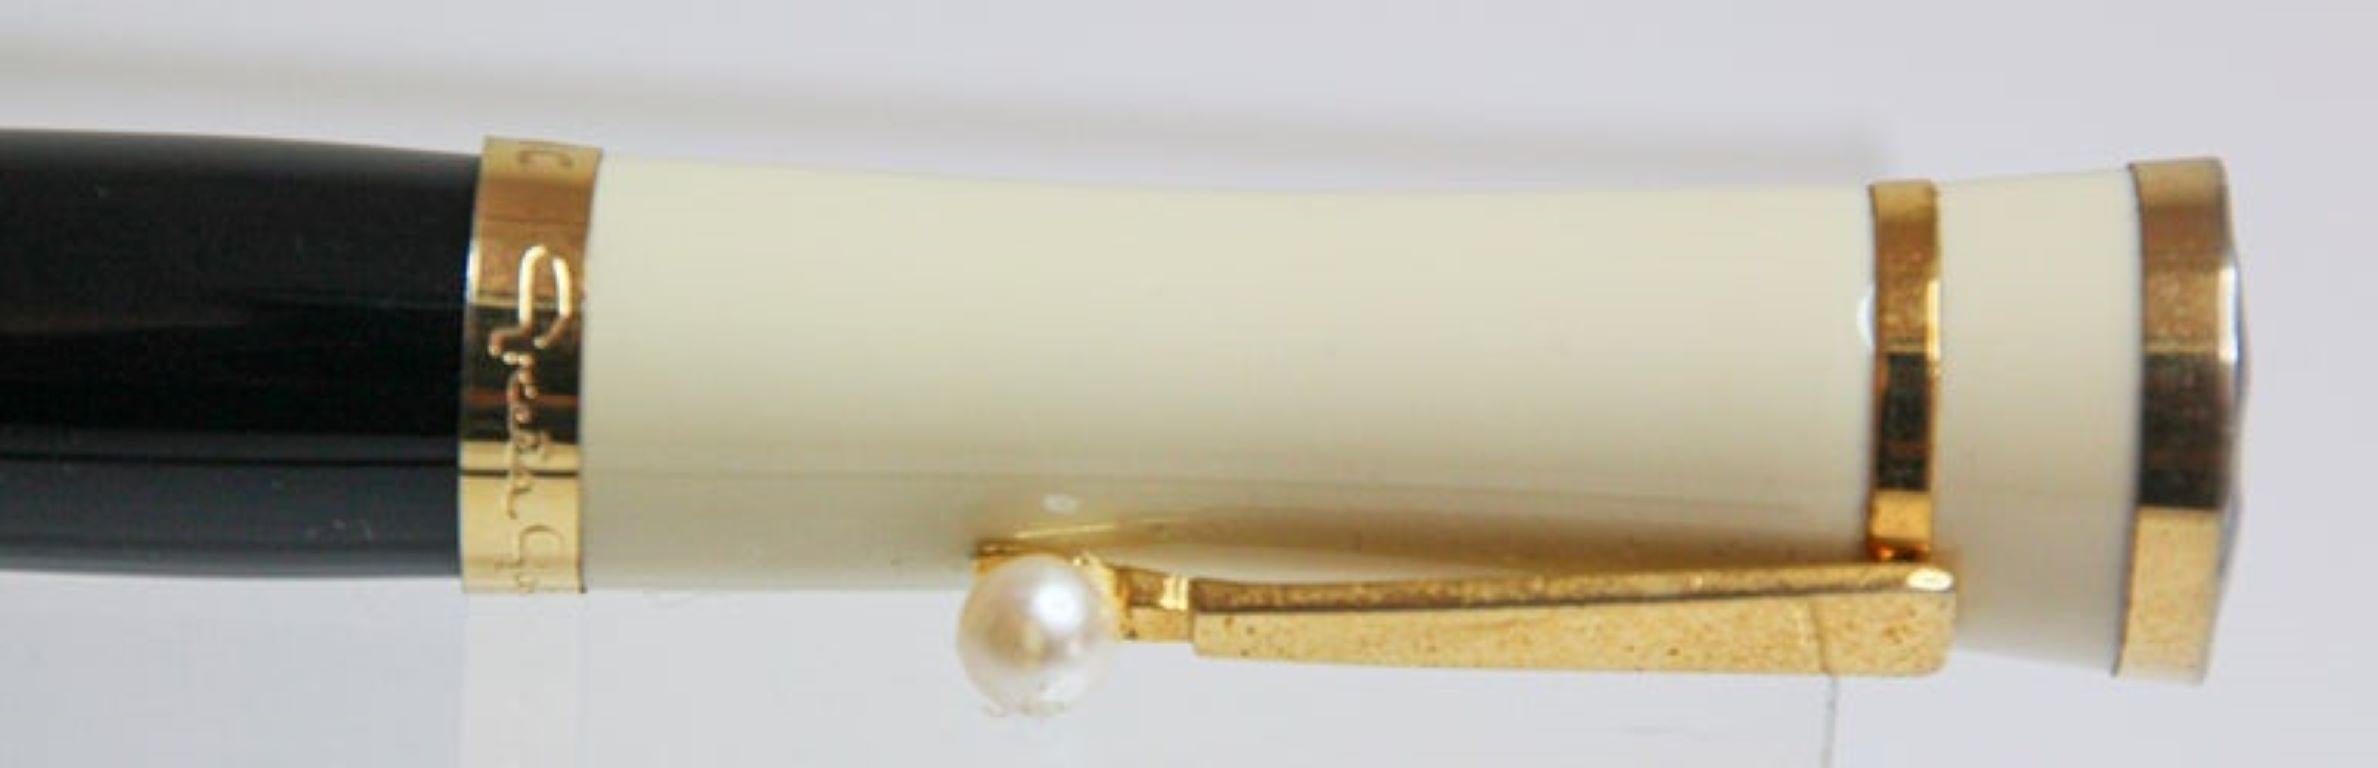 Hand-Crafted Greta Garbo Limited Edition Mont Blanc Ballpoint Pen with Pearl For Sale